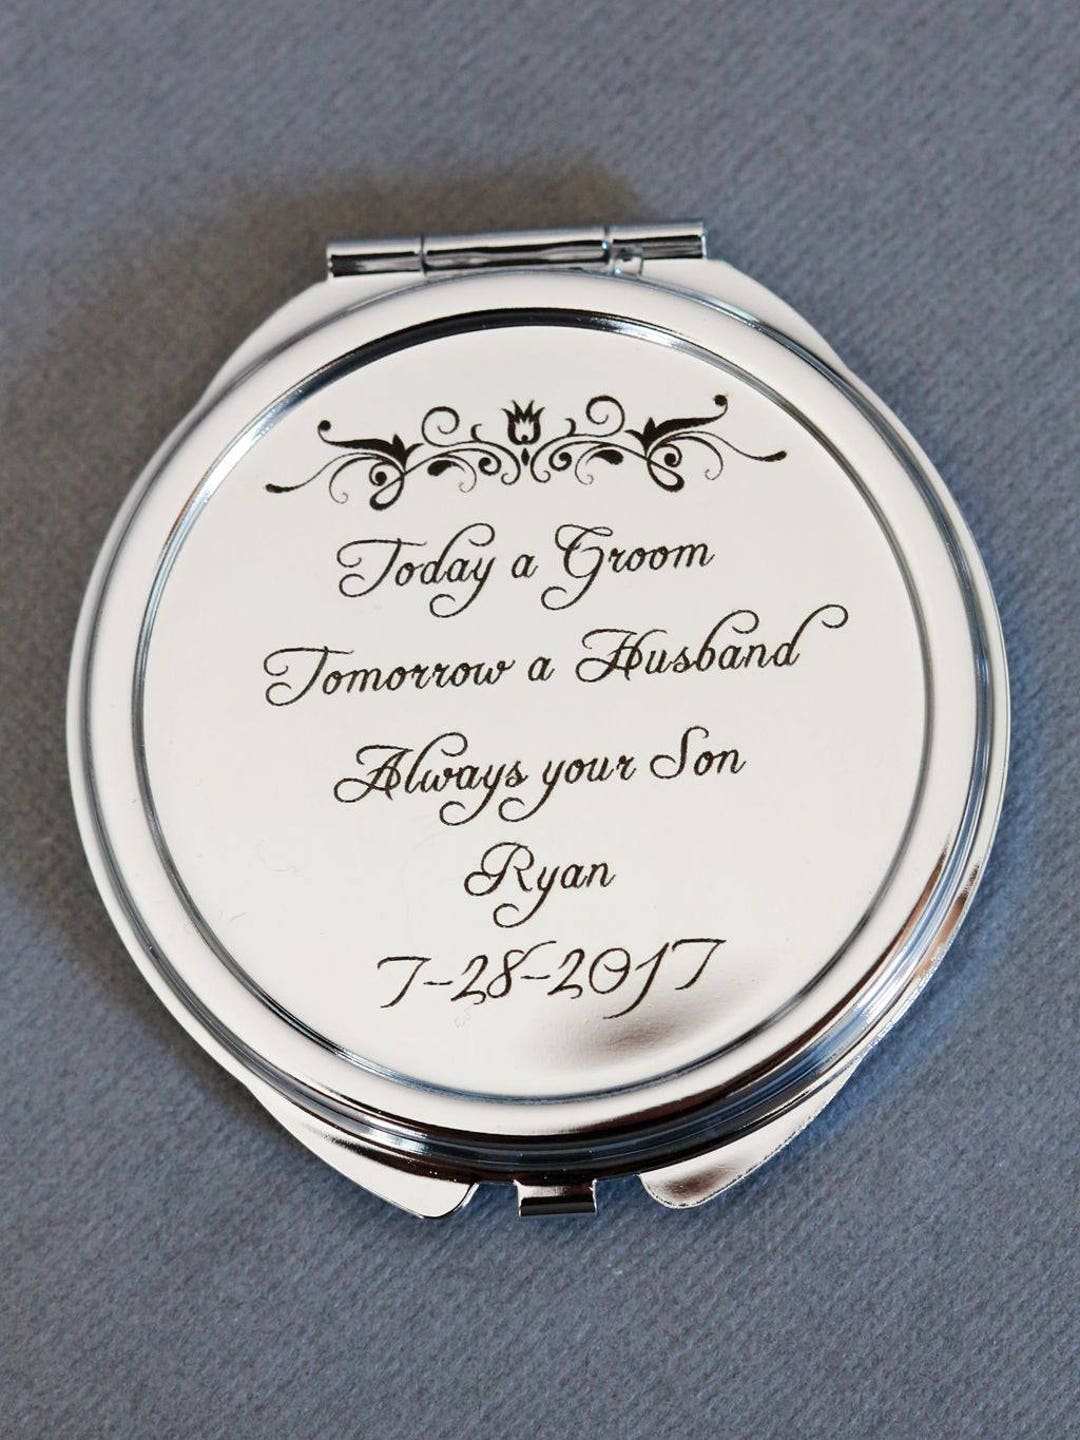 Personalized Compact Mirror Bridesmaids' Gifts 